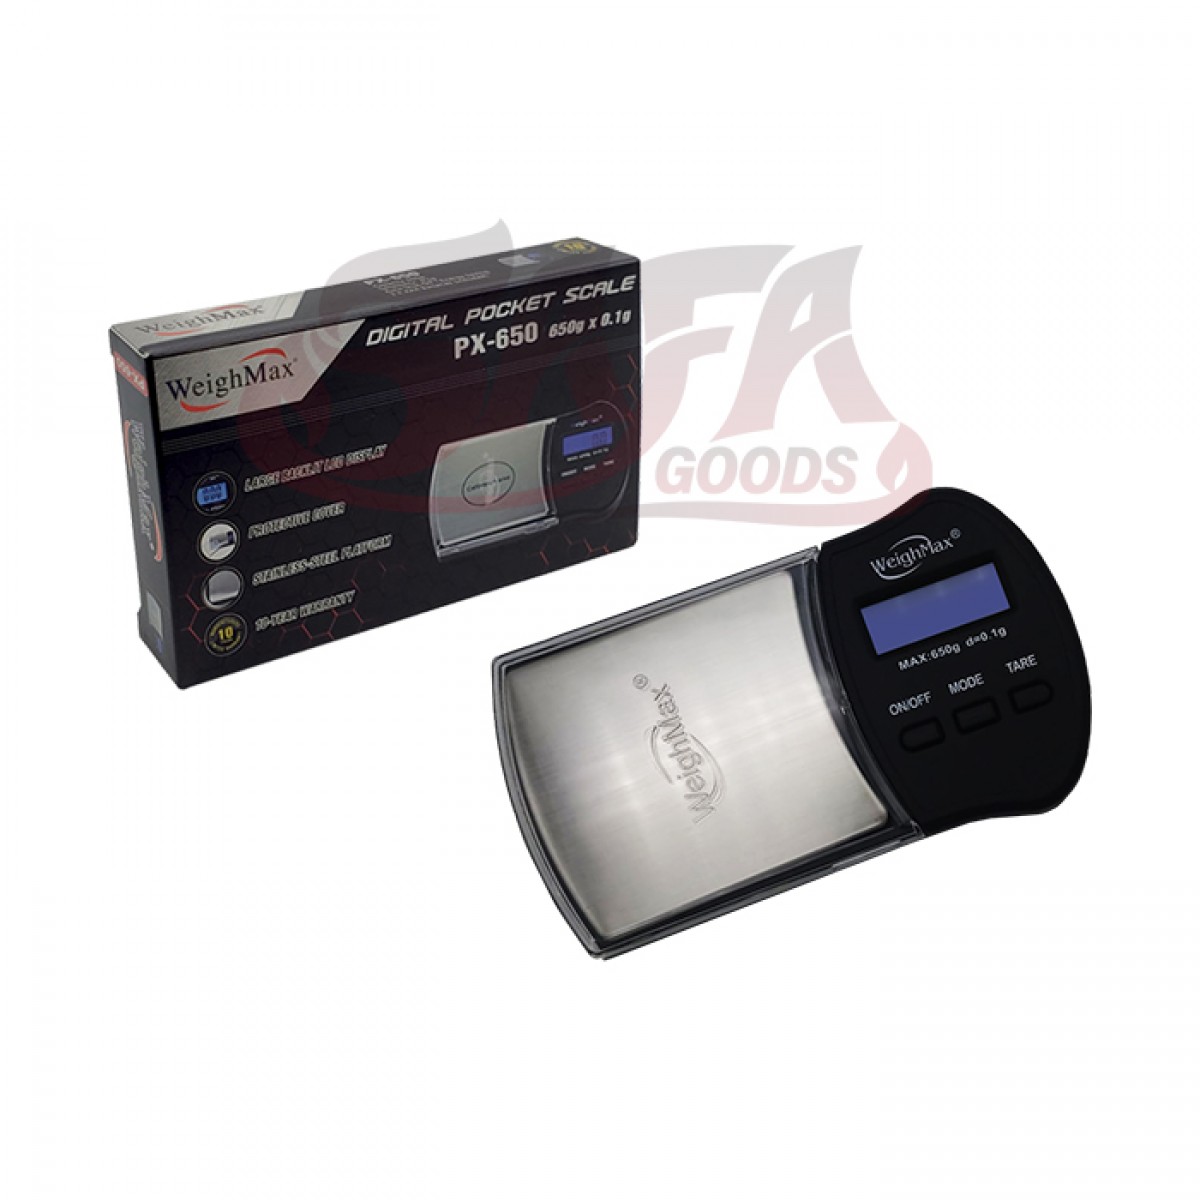 Digital Pocket Scale - WeighMax Scale 0.01g (PX650C)